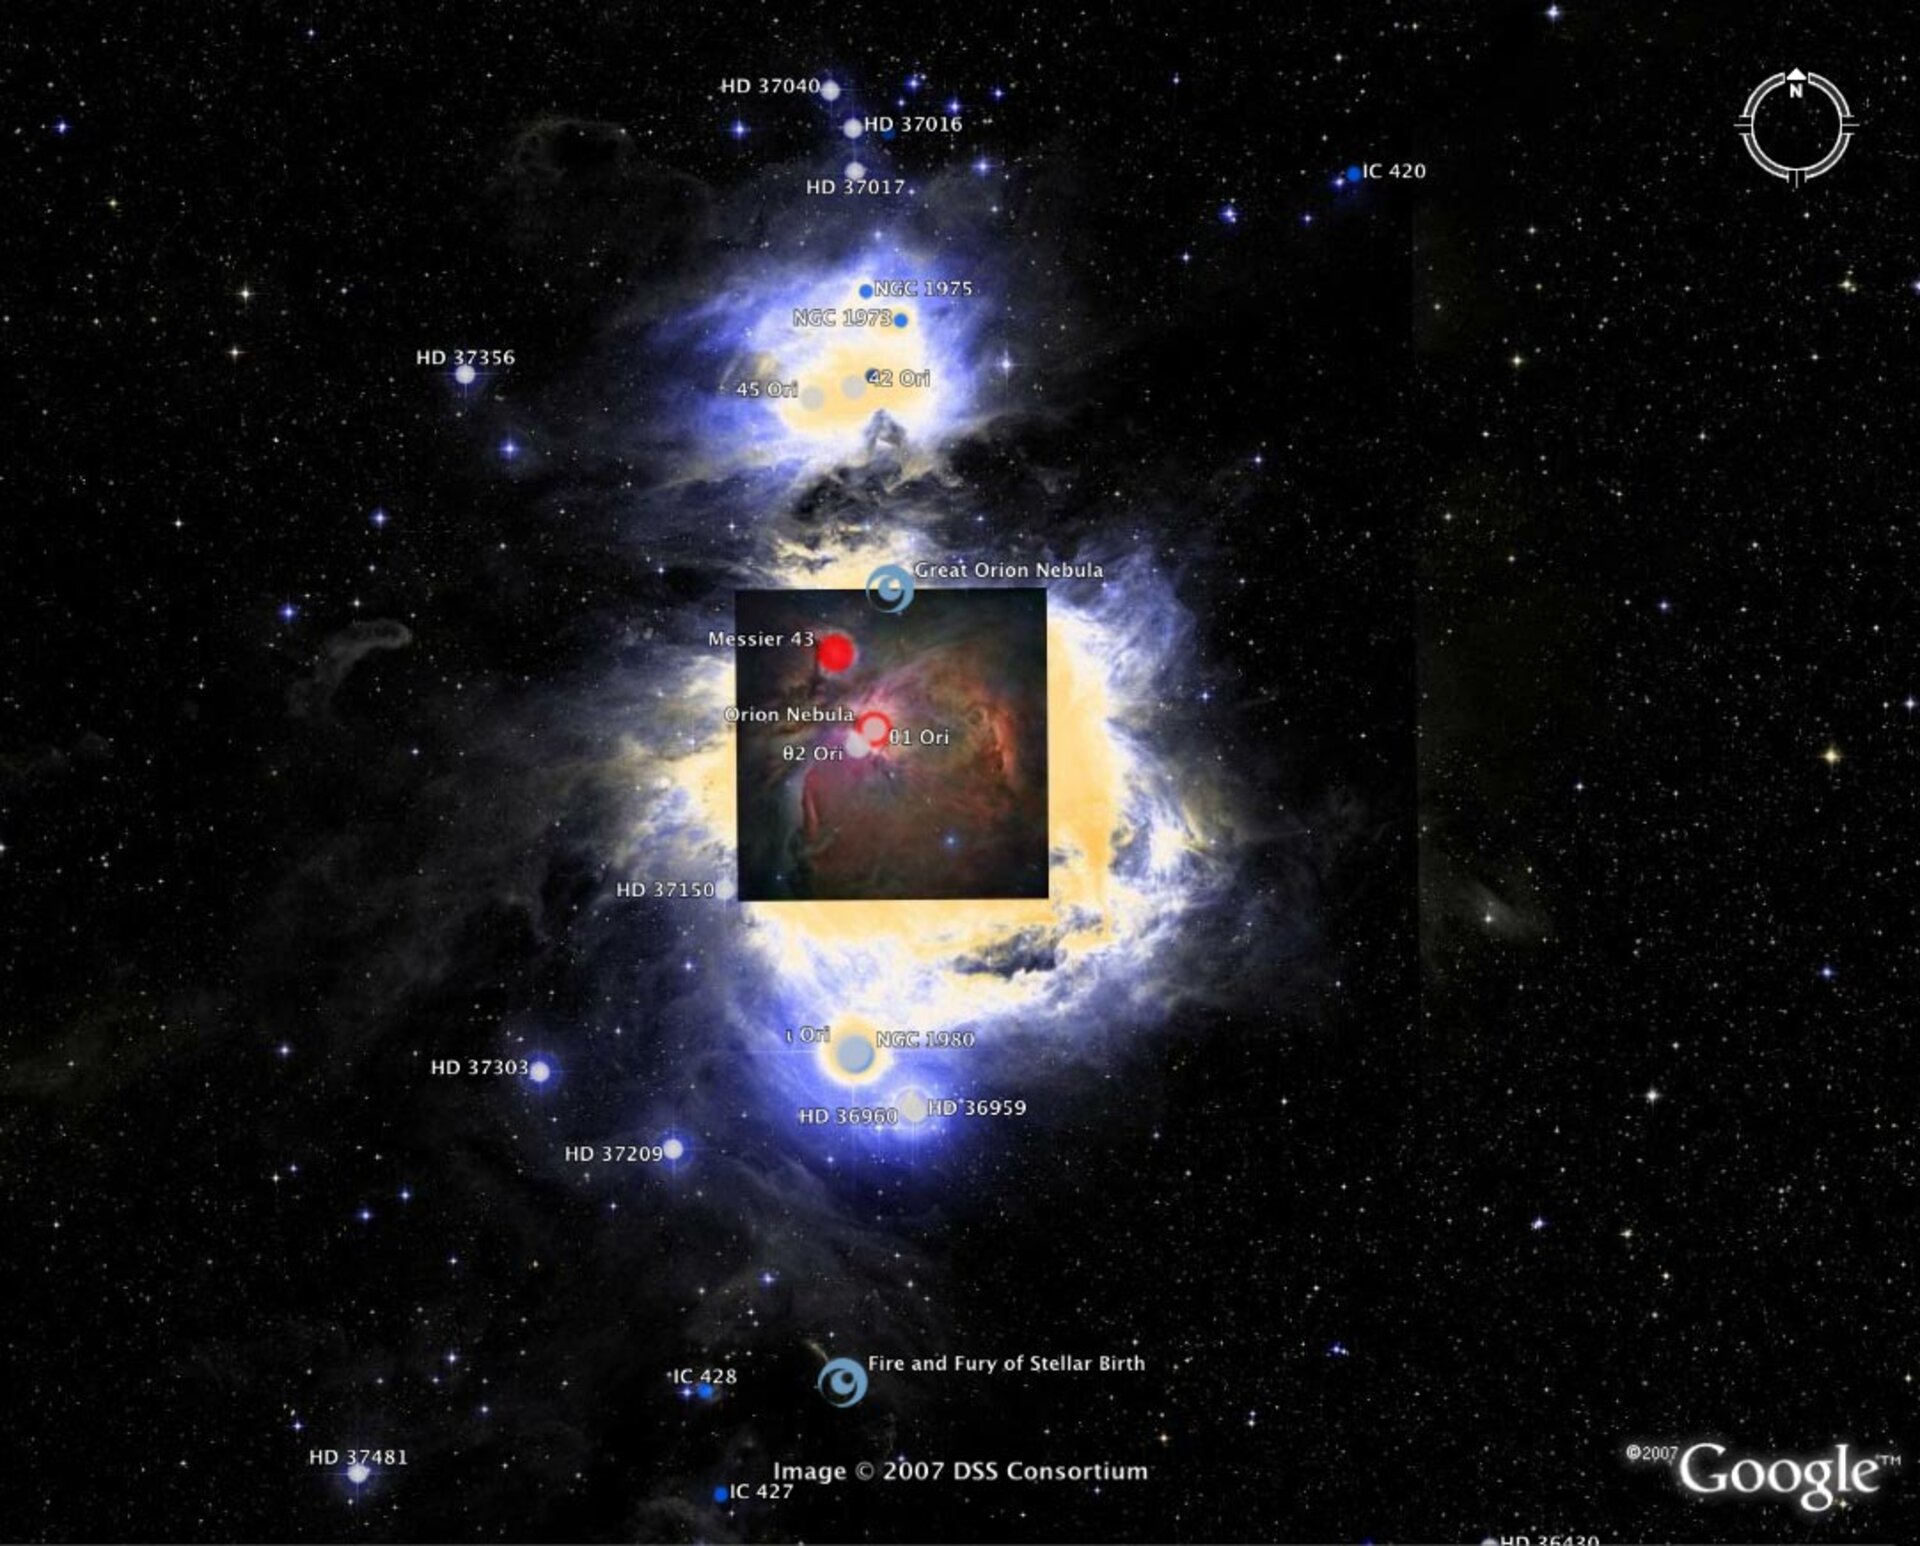 ESA - Google brings the cosmos down to Earth